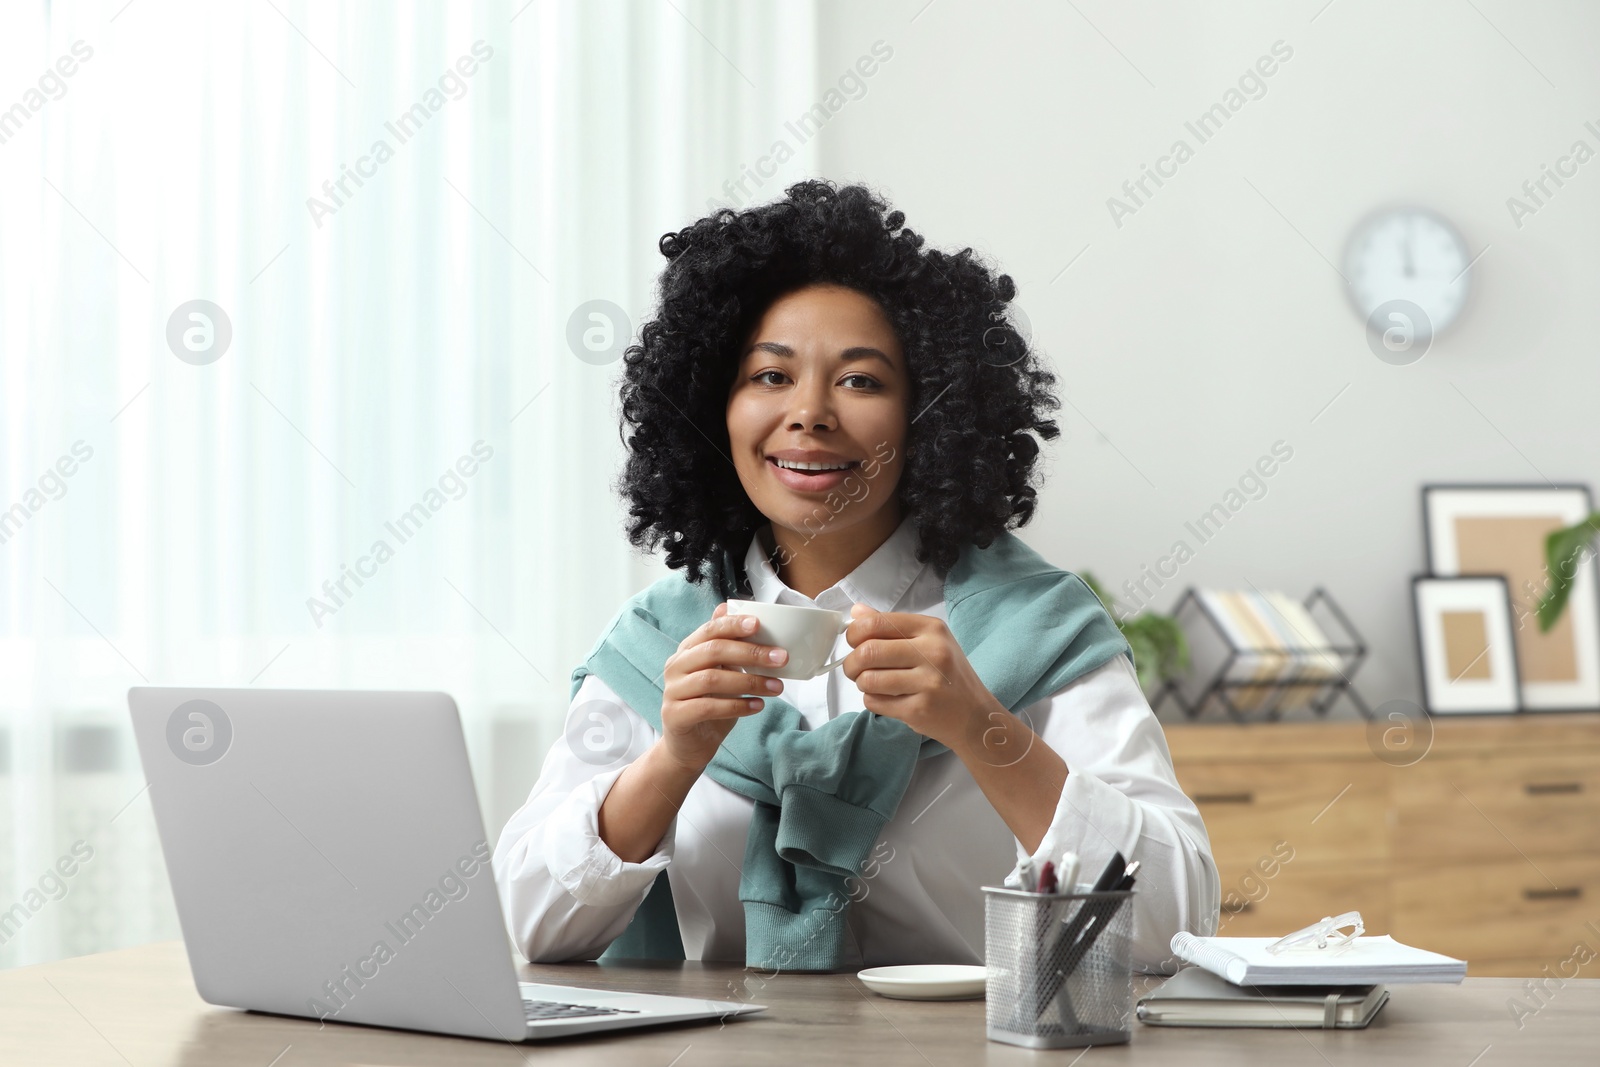 Photo of Happy young woman with cup of drink using laptop at wooden desk indoors